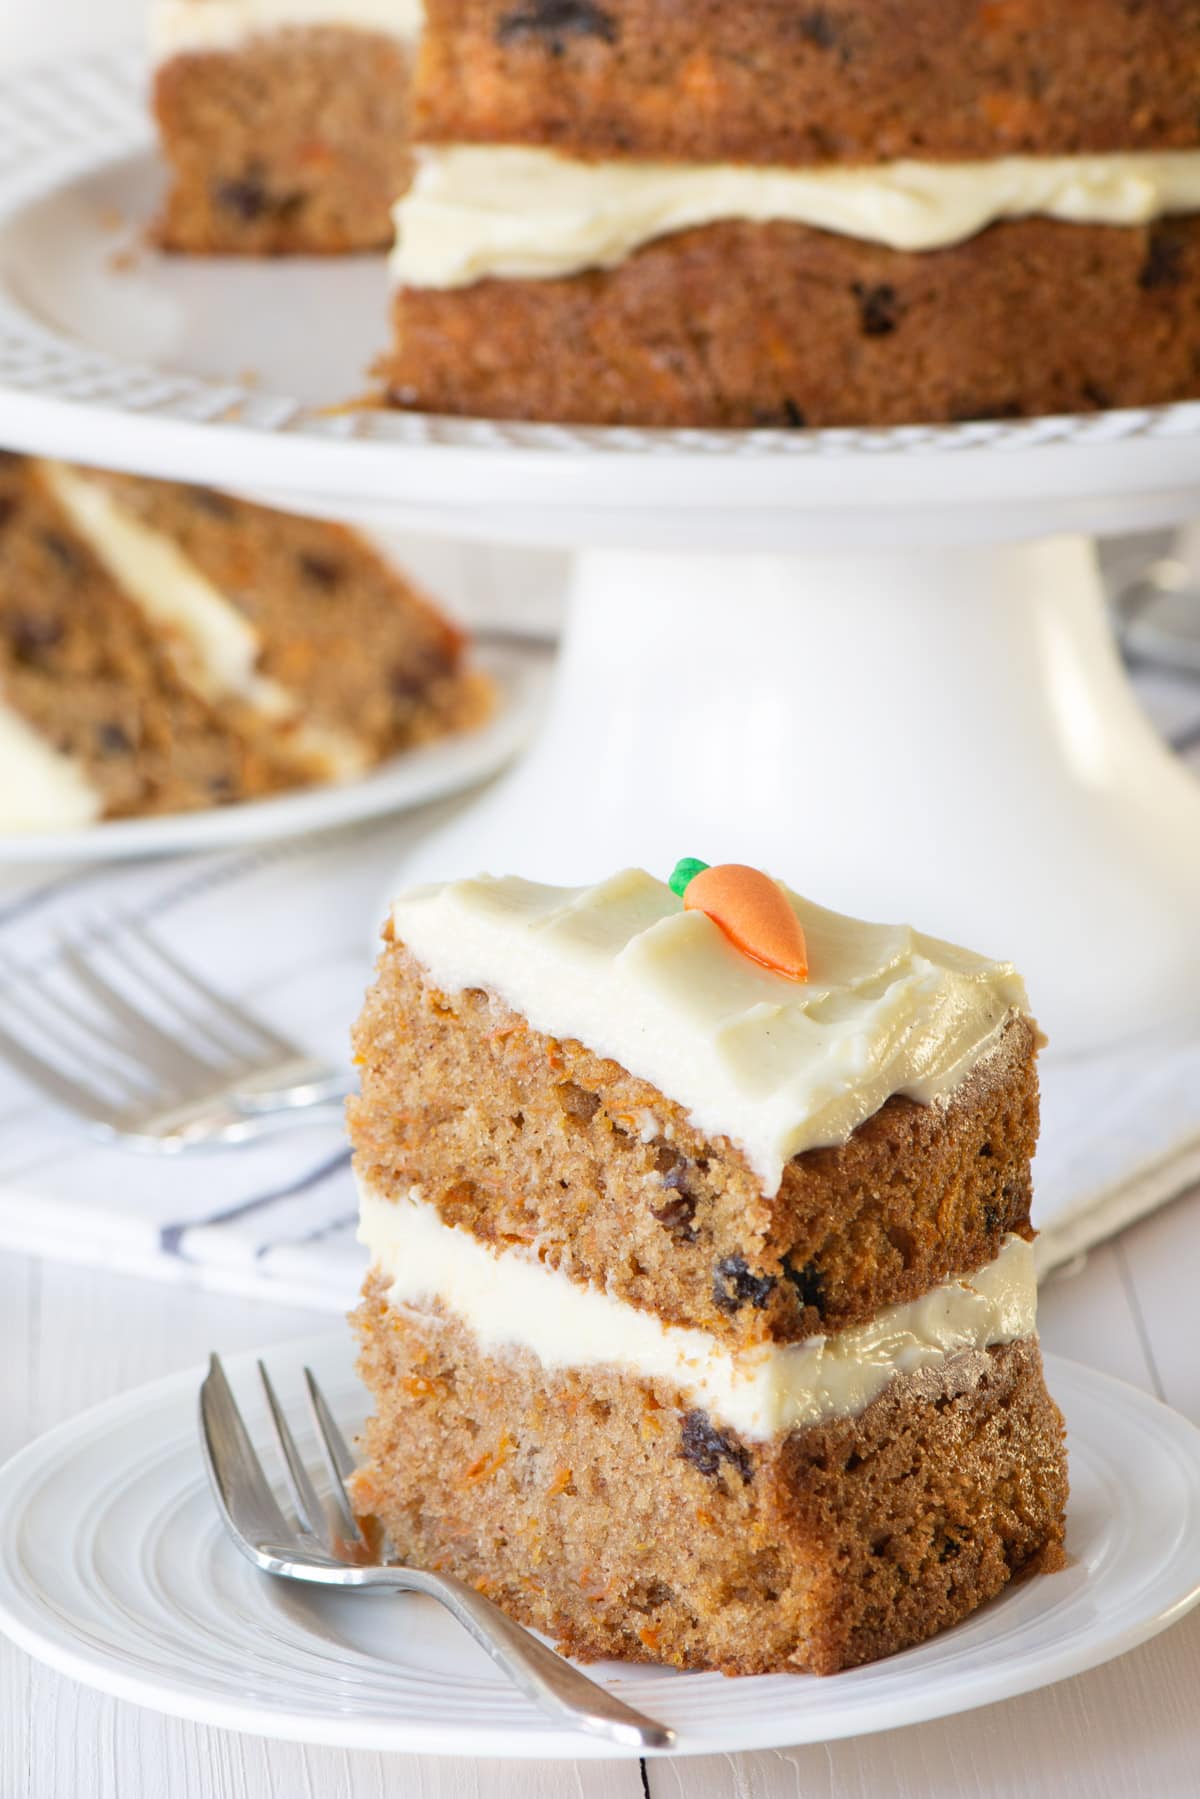 A slice of carrot cake on a white plate. The remaining cake is in the background. The slice shows the raisins running through the carrot cake sponge.